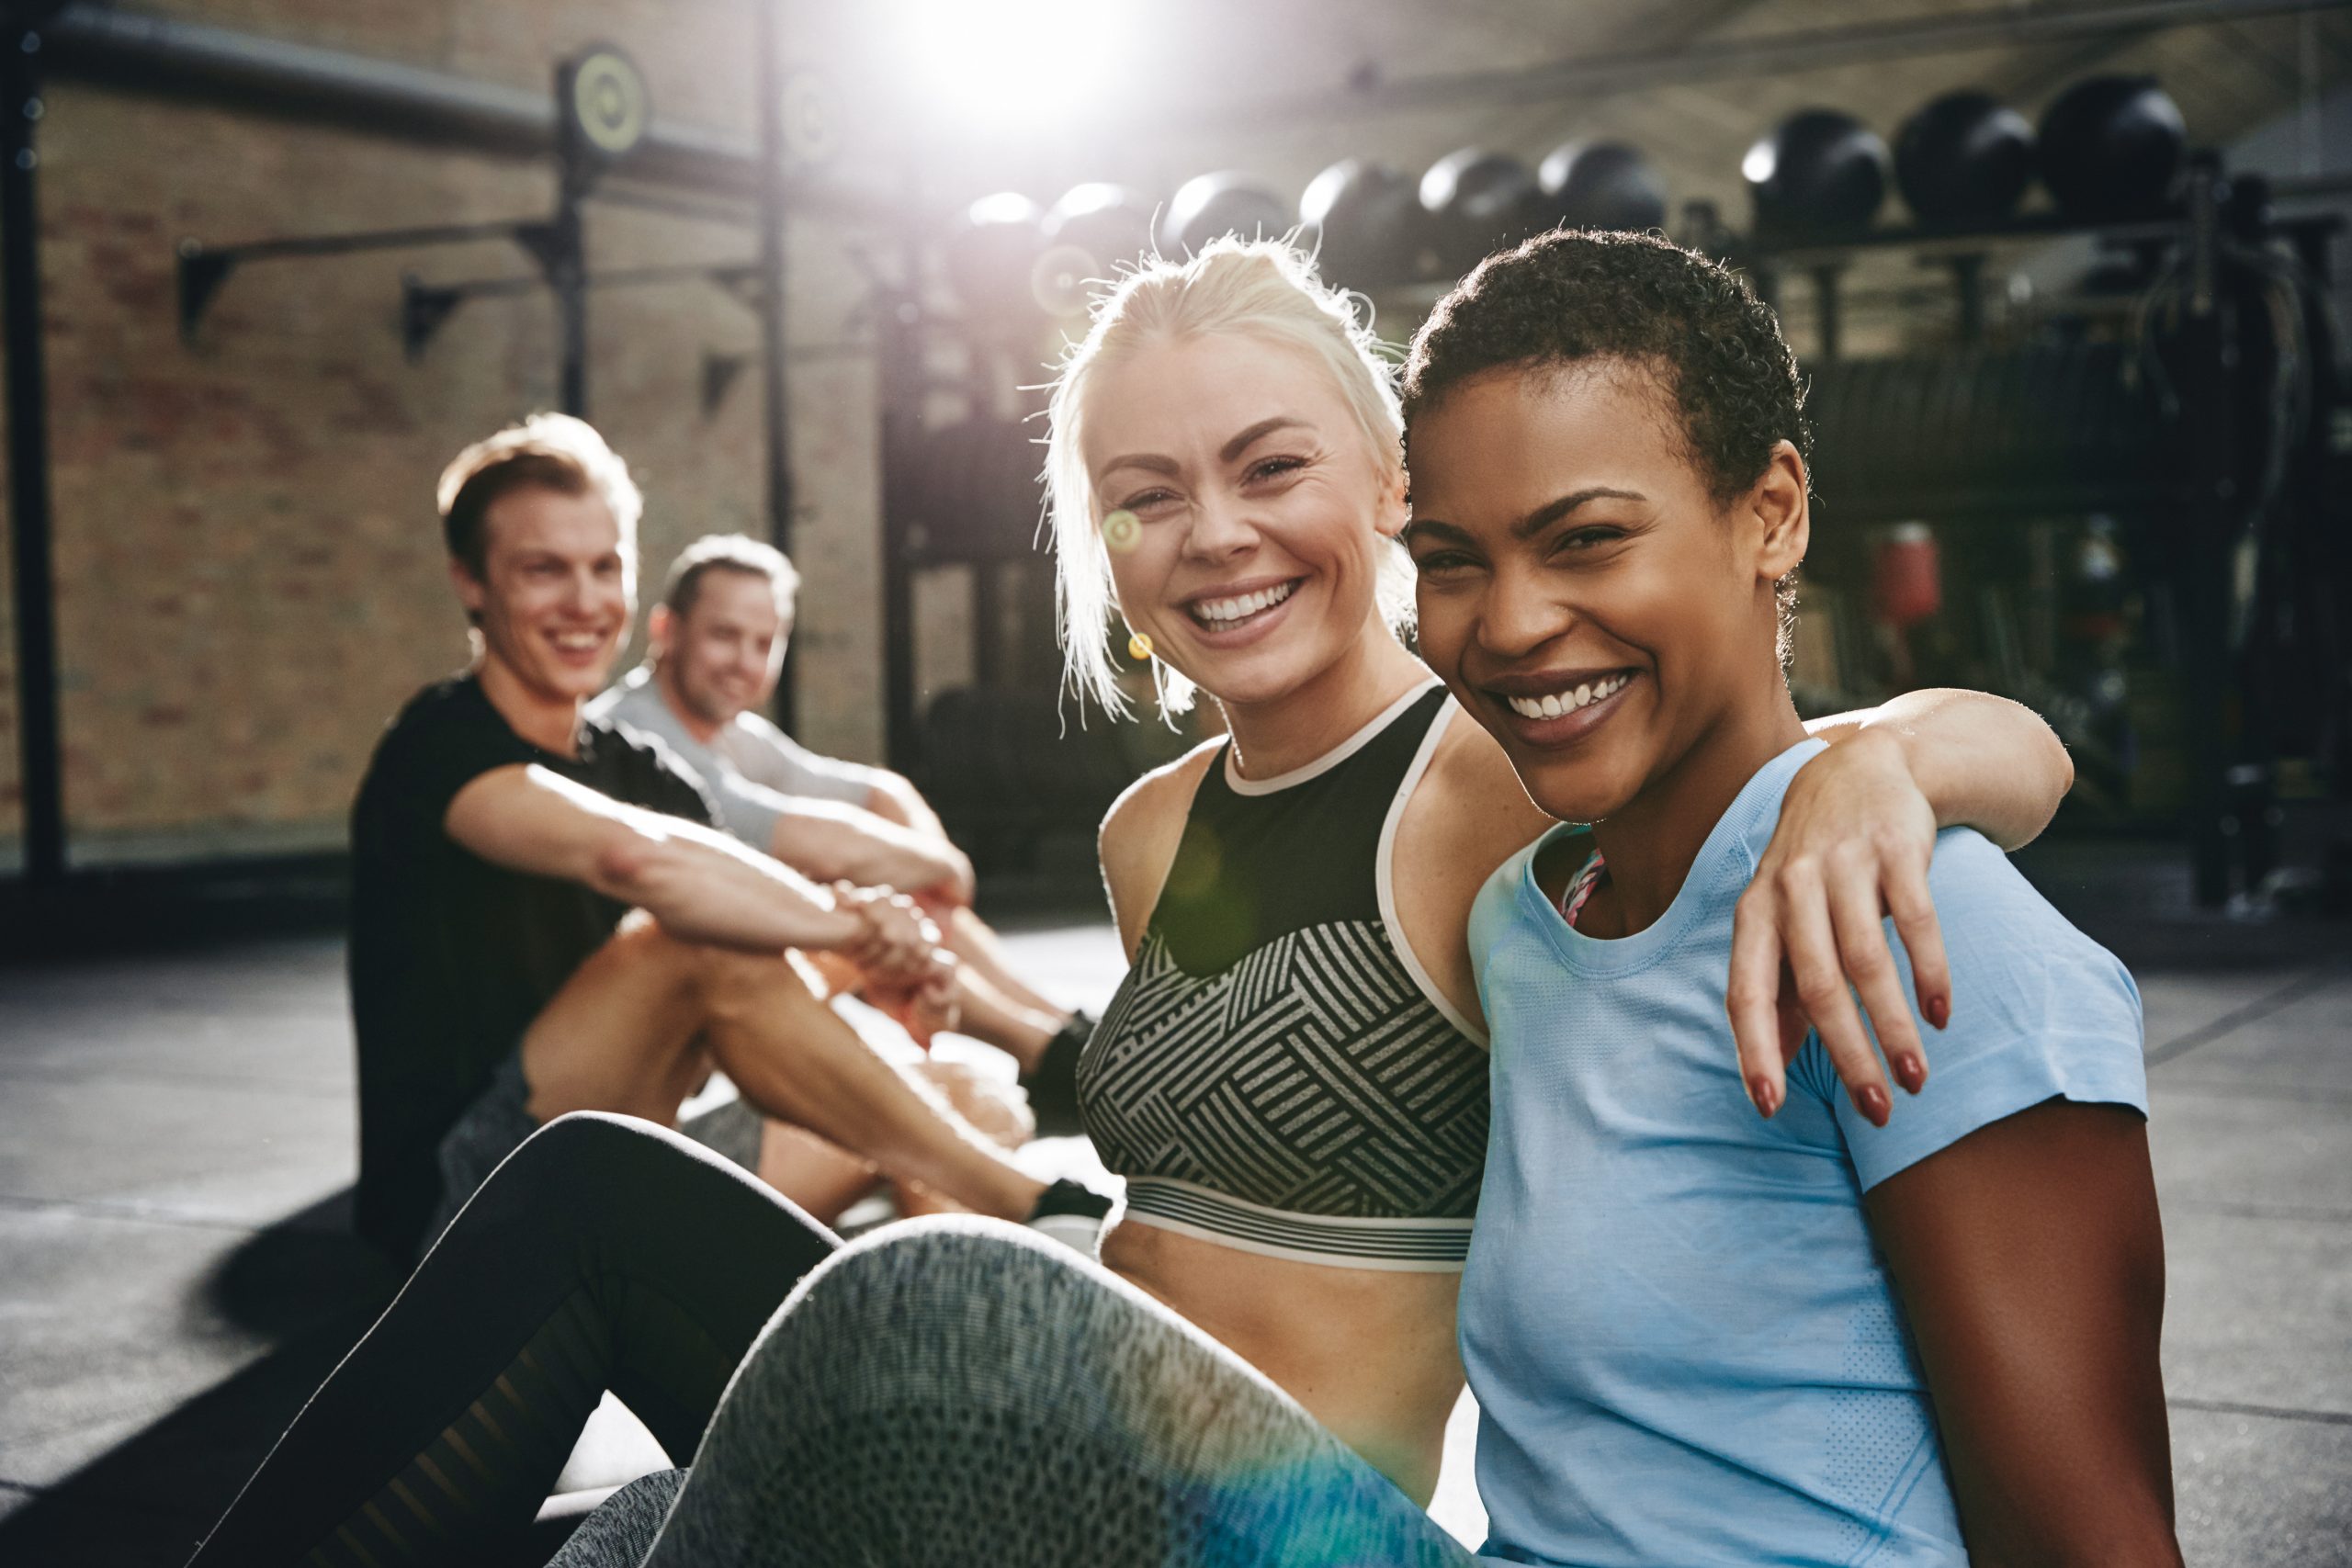 Two fit young women in sportswear laughing while sitting arm in arm together on the floor of a gym after working out